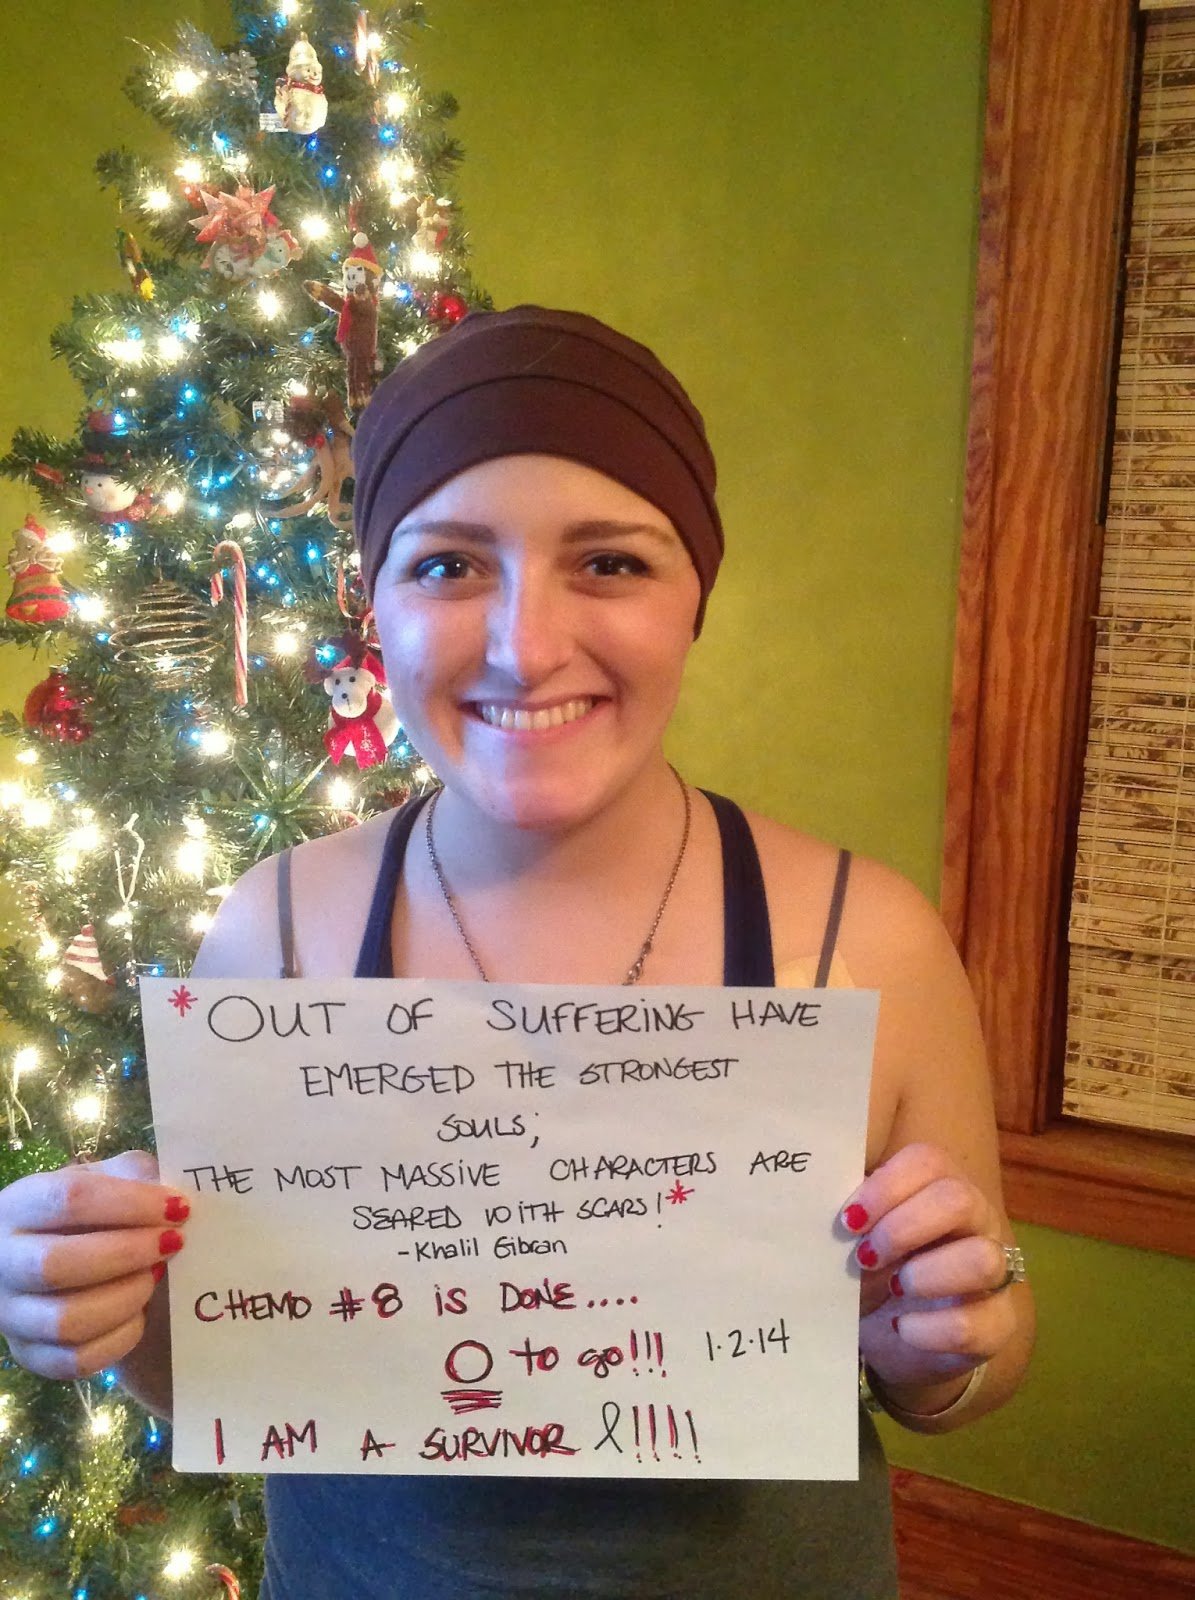 Carri Us Home: Chemo #8 and Closing This Chapter in my Journey